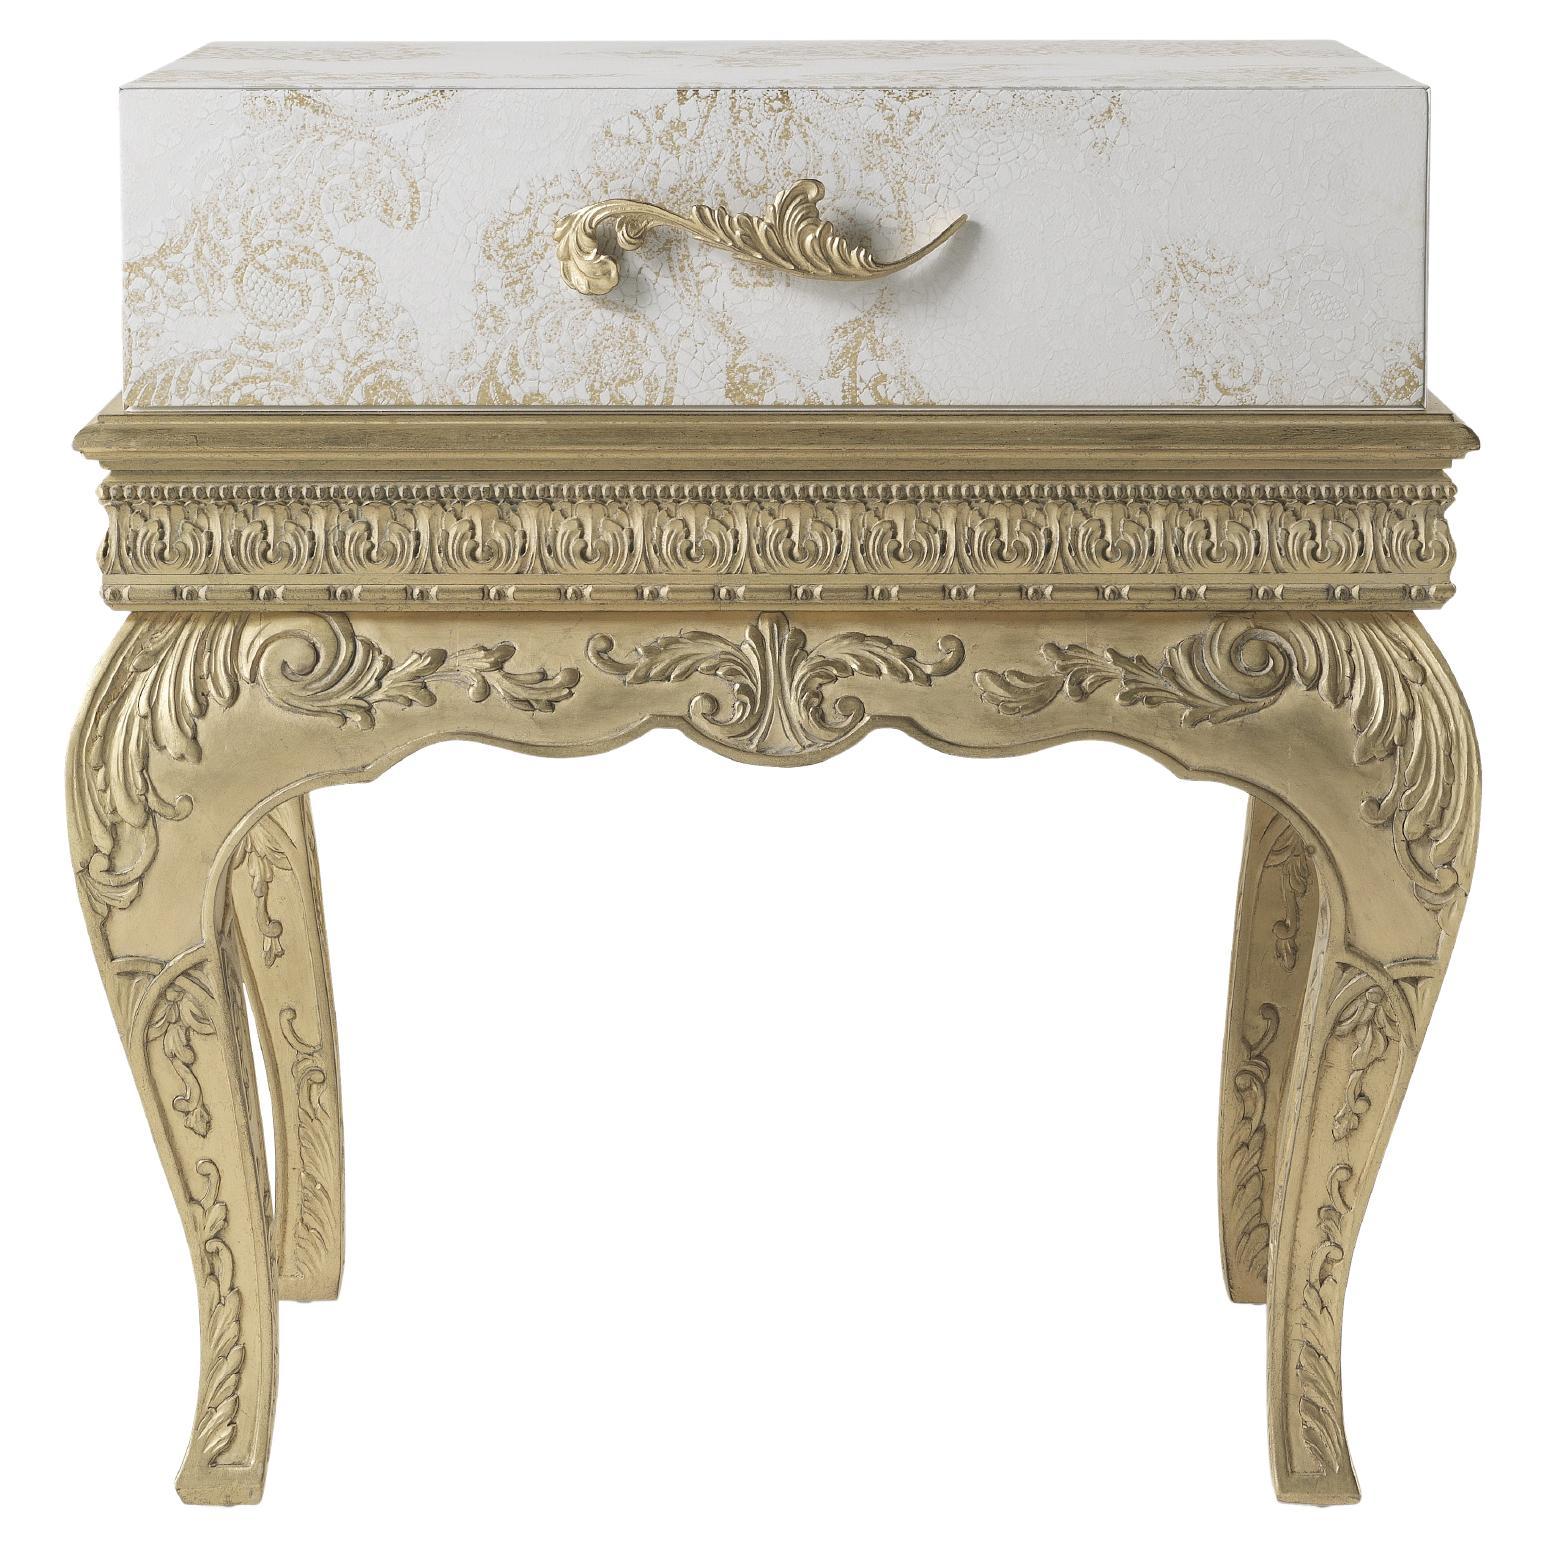 21st Century Brocart Night Table with Gold Leaf Laser Engraved Lace Decoration For Sale